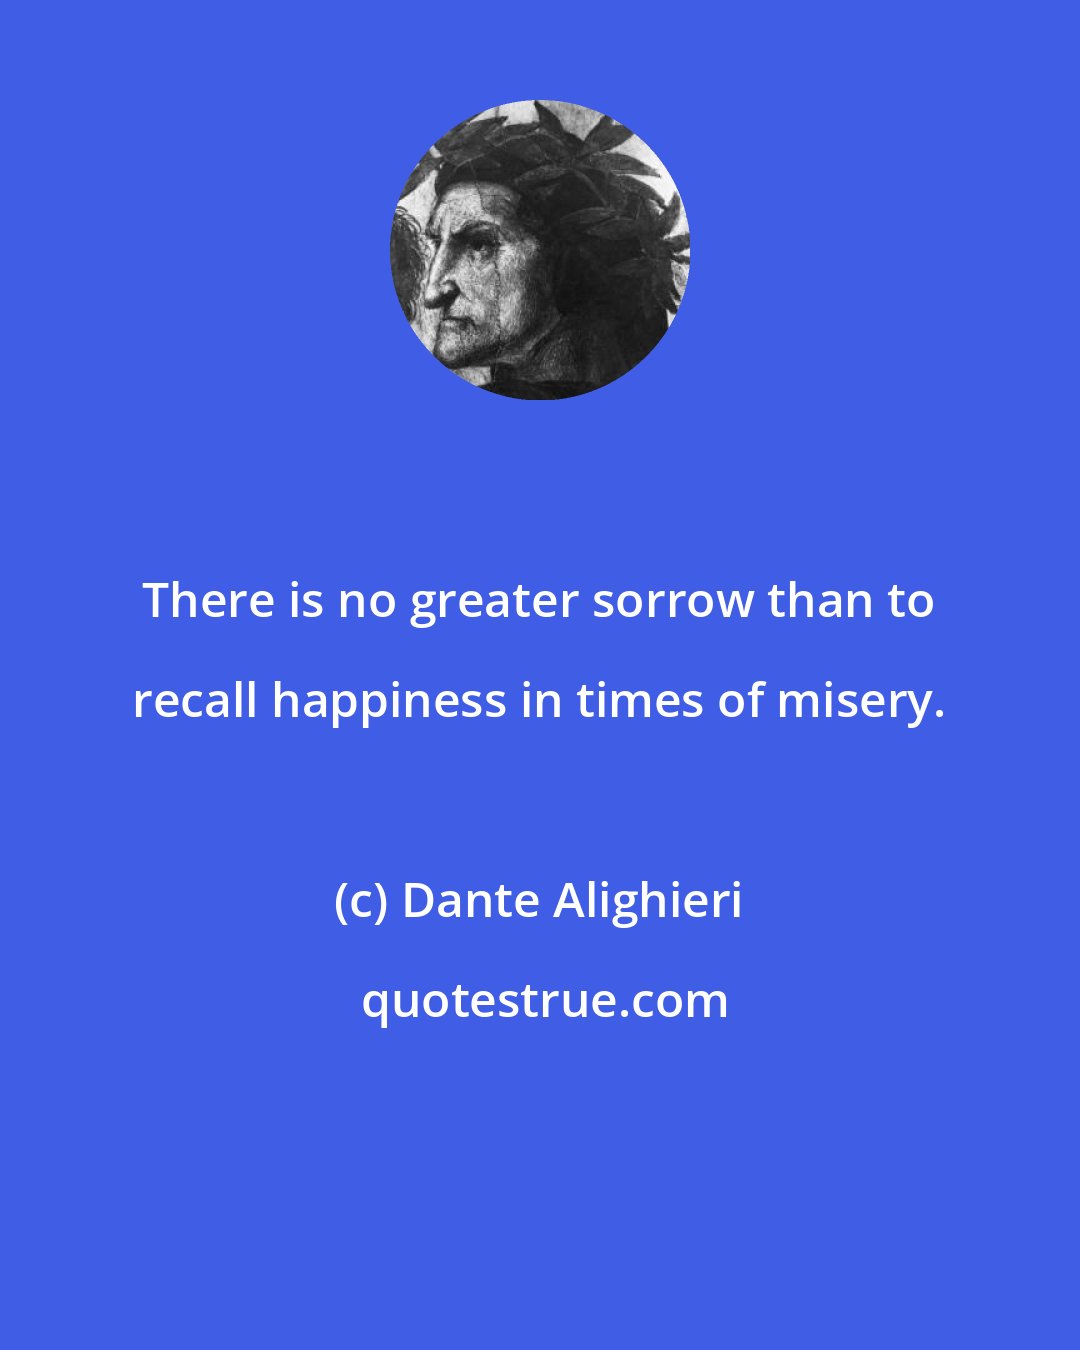 Dante Alighieri: There is no greater sorrow than to recall happiness in times of misery.